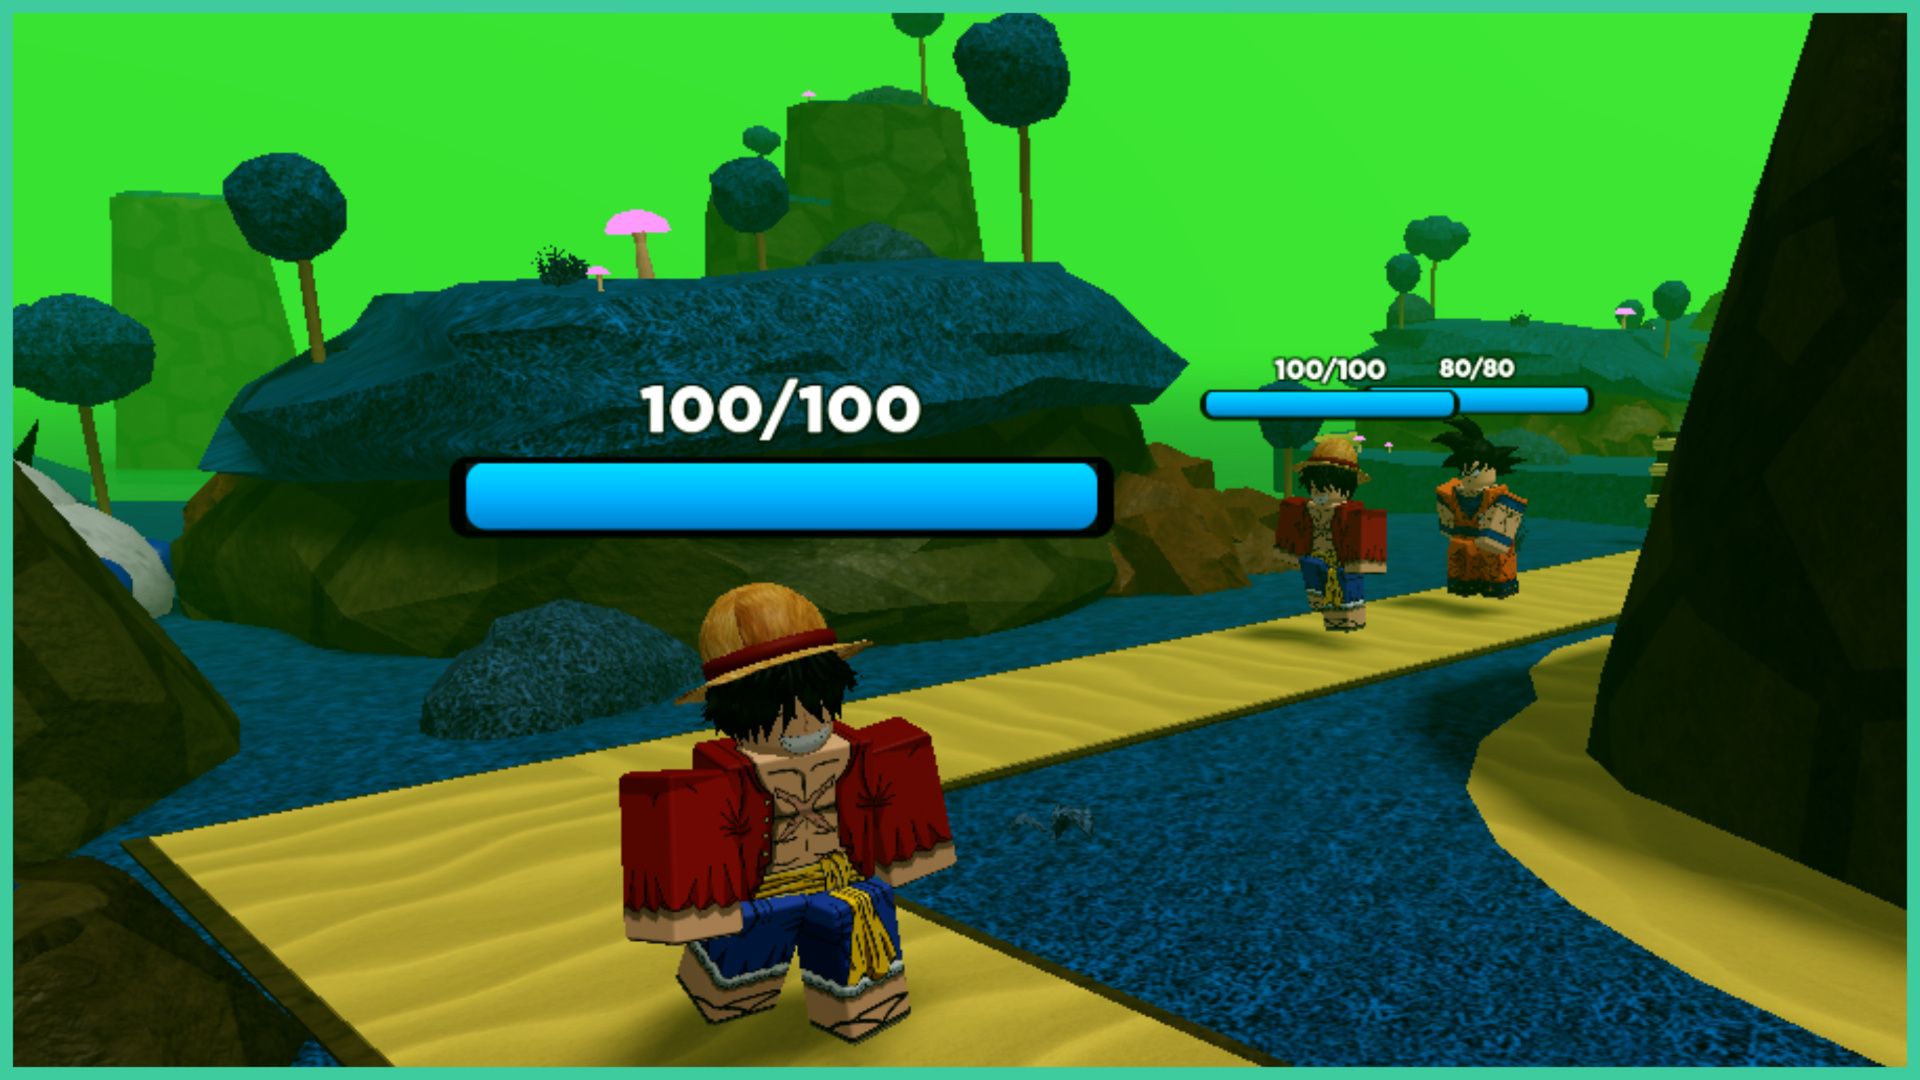 feature image for our anime rangers tier list, the screenshot includes 2 roblox versions of luffy from one piece and goku from dragon ball z as they follow a path, with a green sky, circular trees, glowing pink mushrooms, and various cliffs in the distance, they all have HP bars above their heads, with luffy having 100/100 and goku having 80/80